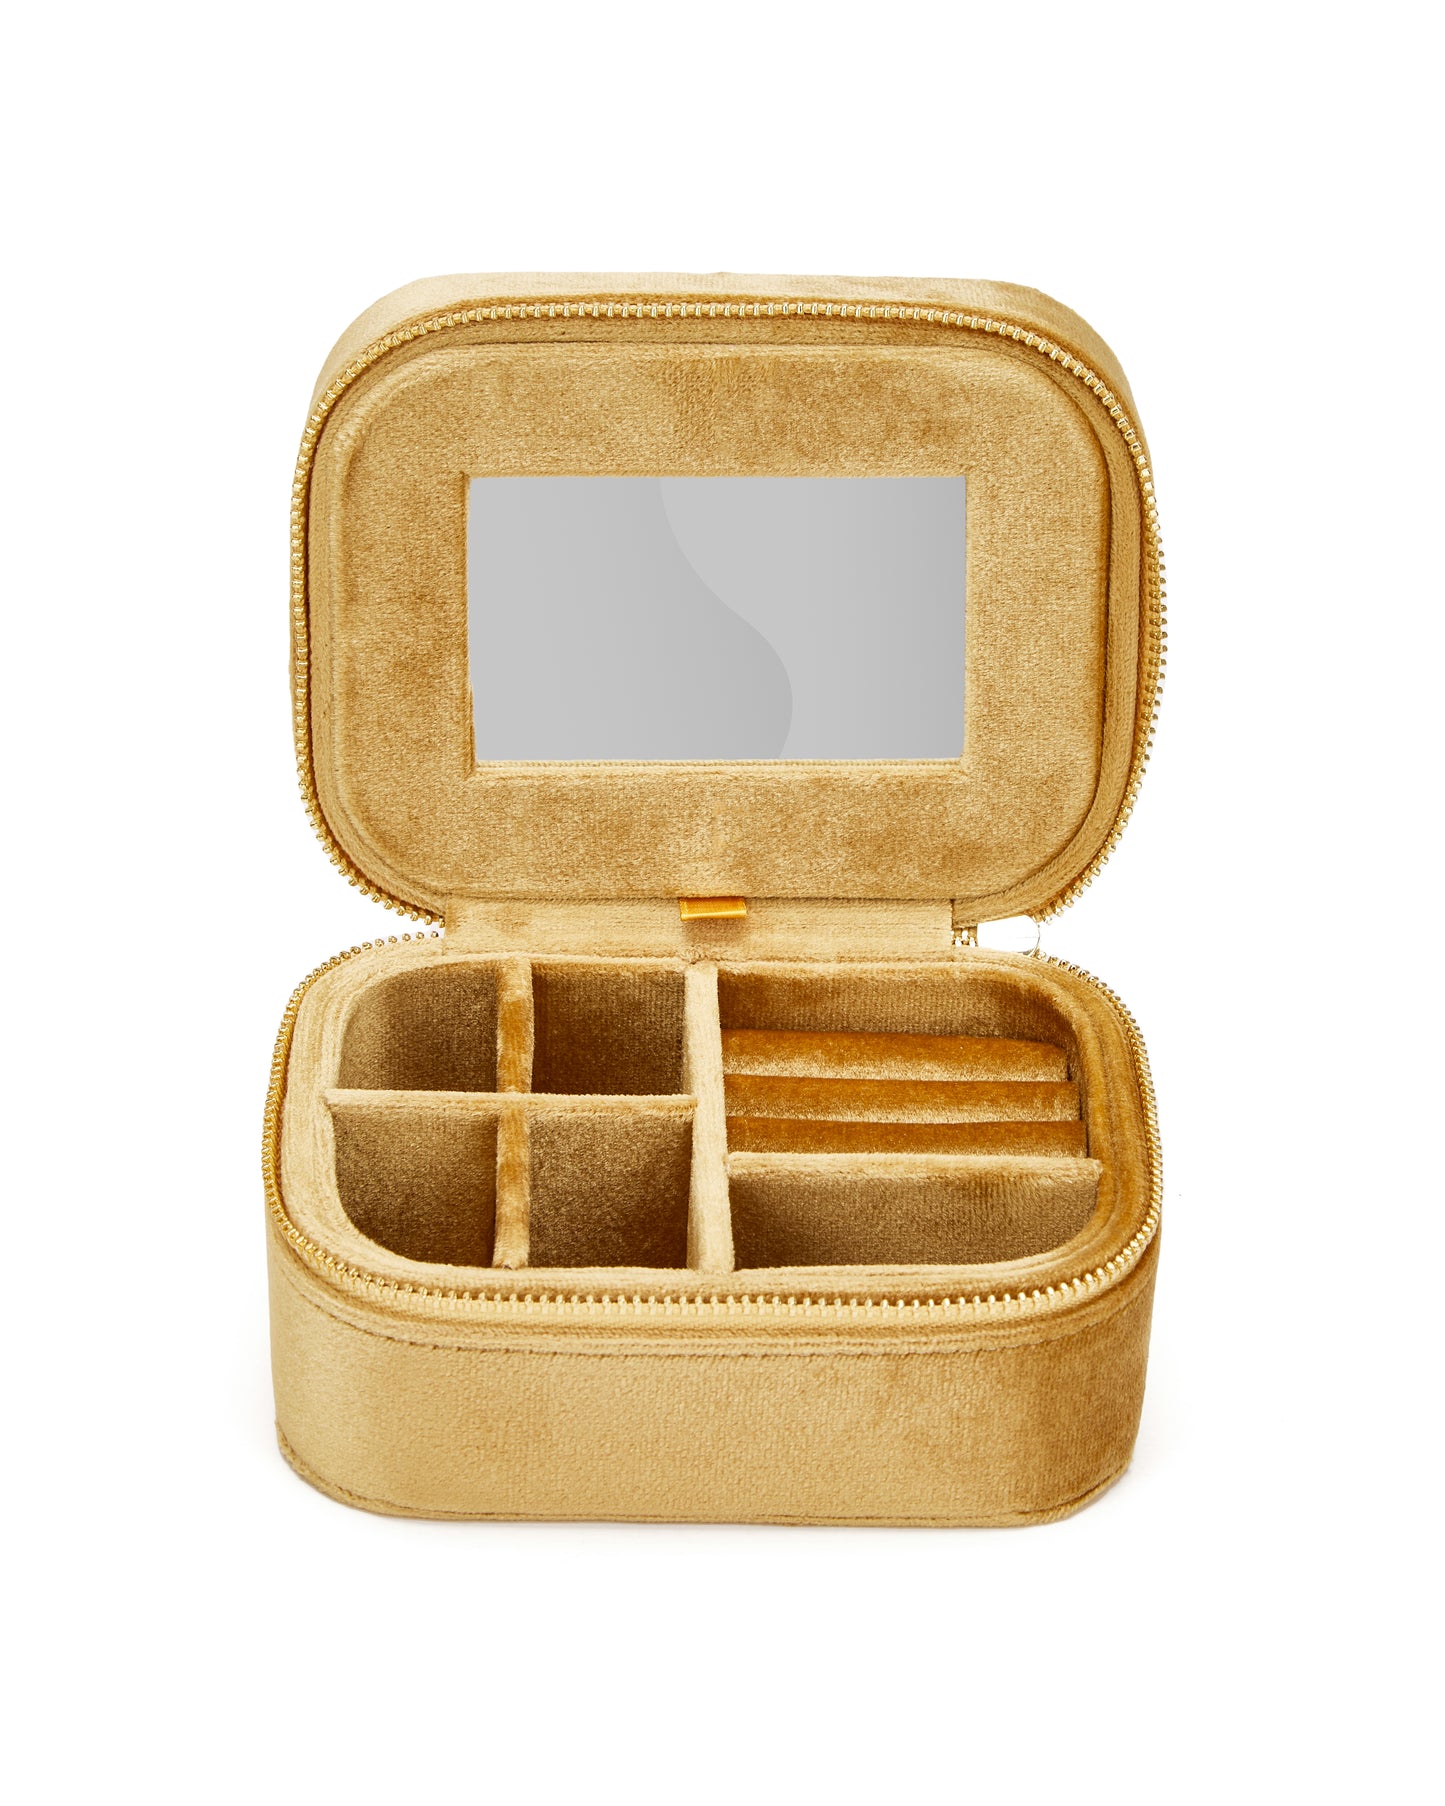 Jewelry Box AMBER col. gold, directly orderable - 5 pieces